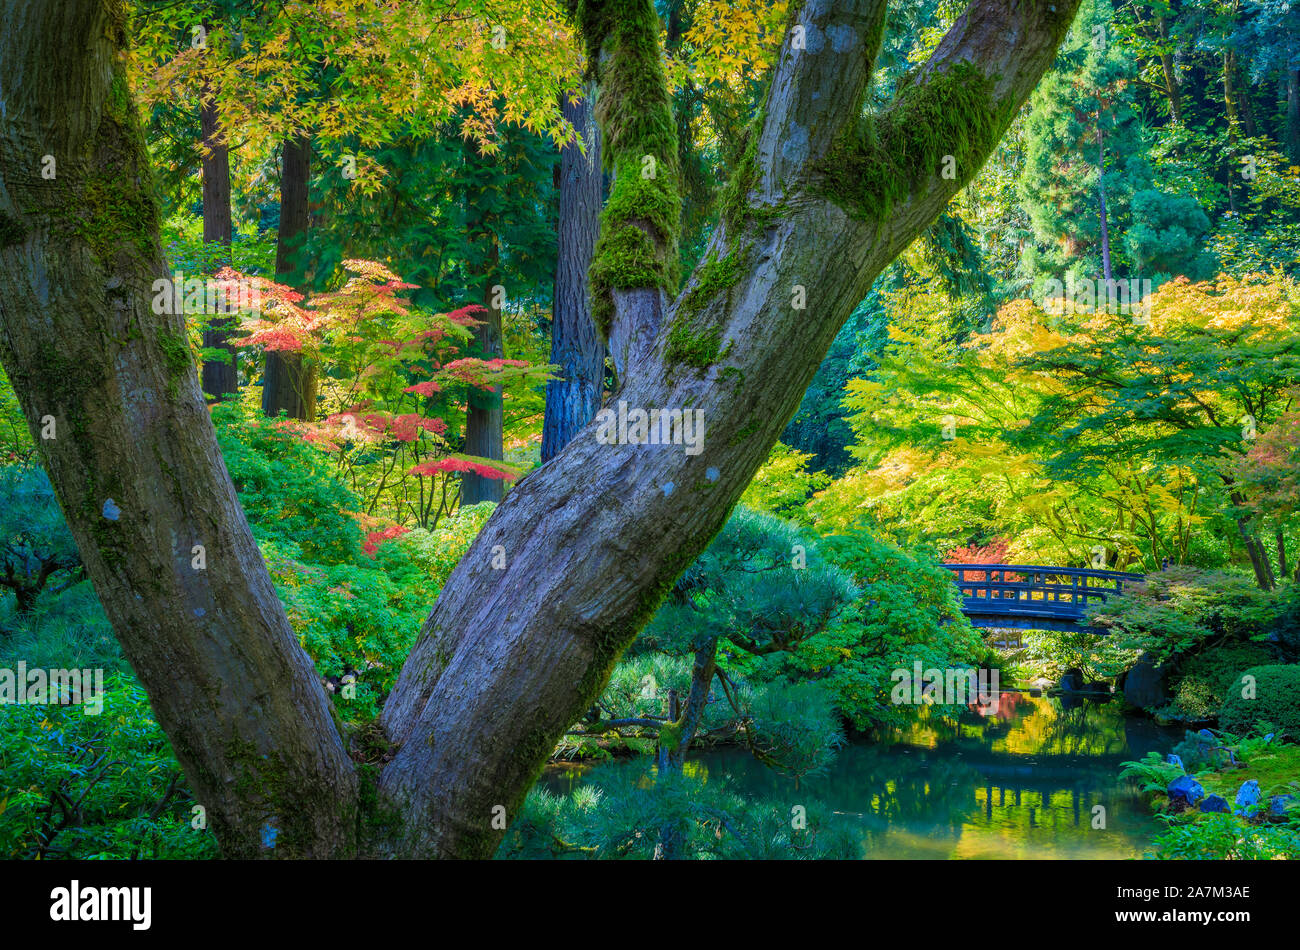 The Portland Japanese Garden is a traditional Japanese garden occupying 12 acres, located within Washington Park in the West Hills of Portland, Oregon Stock Photo